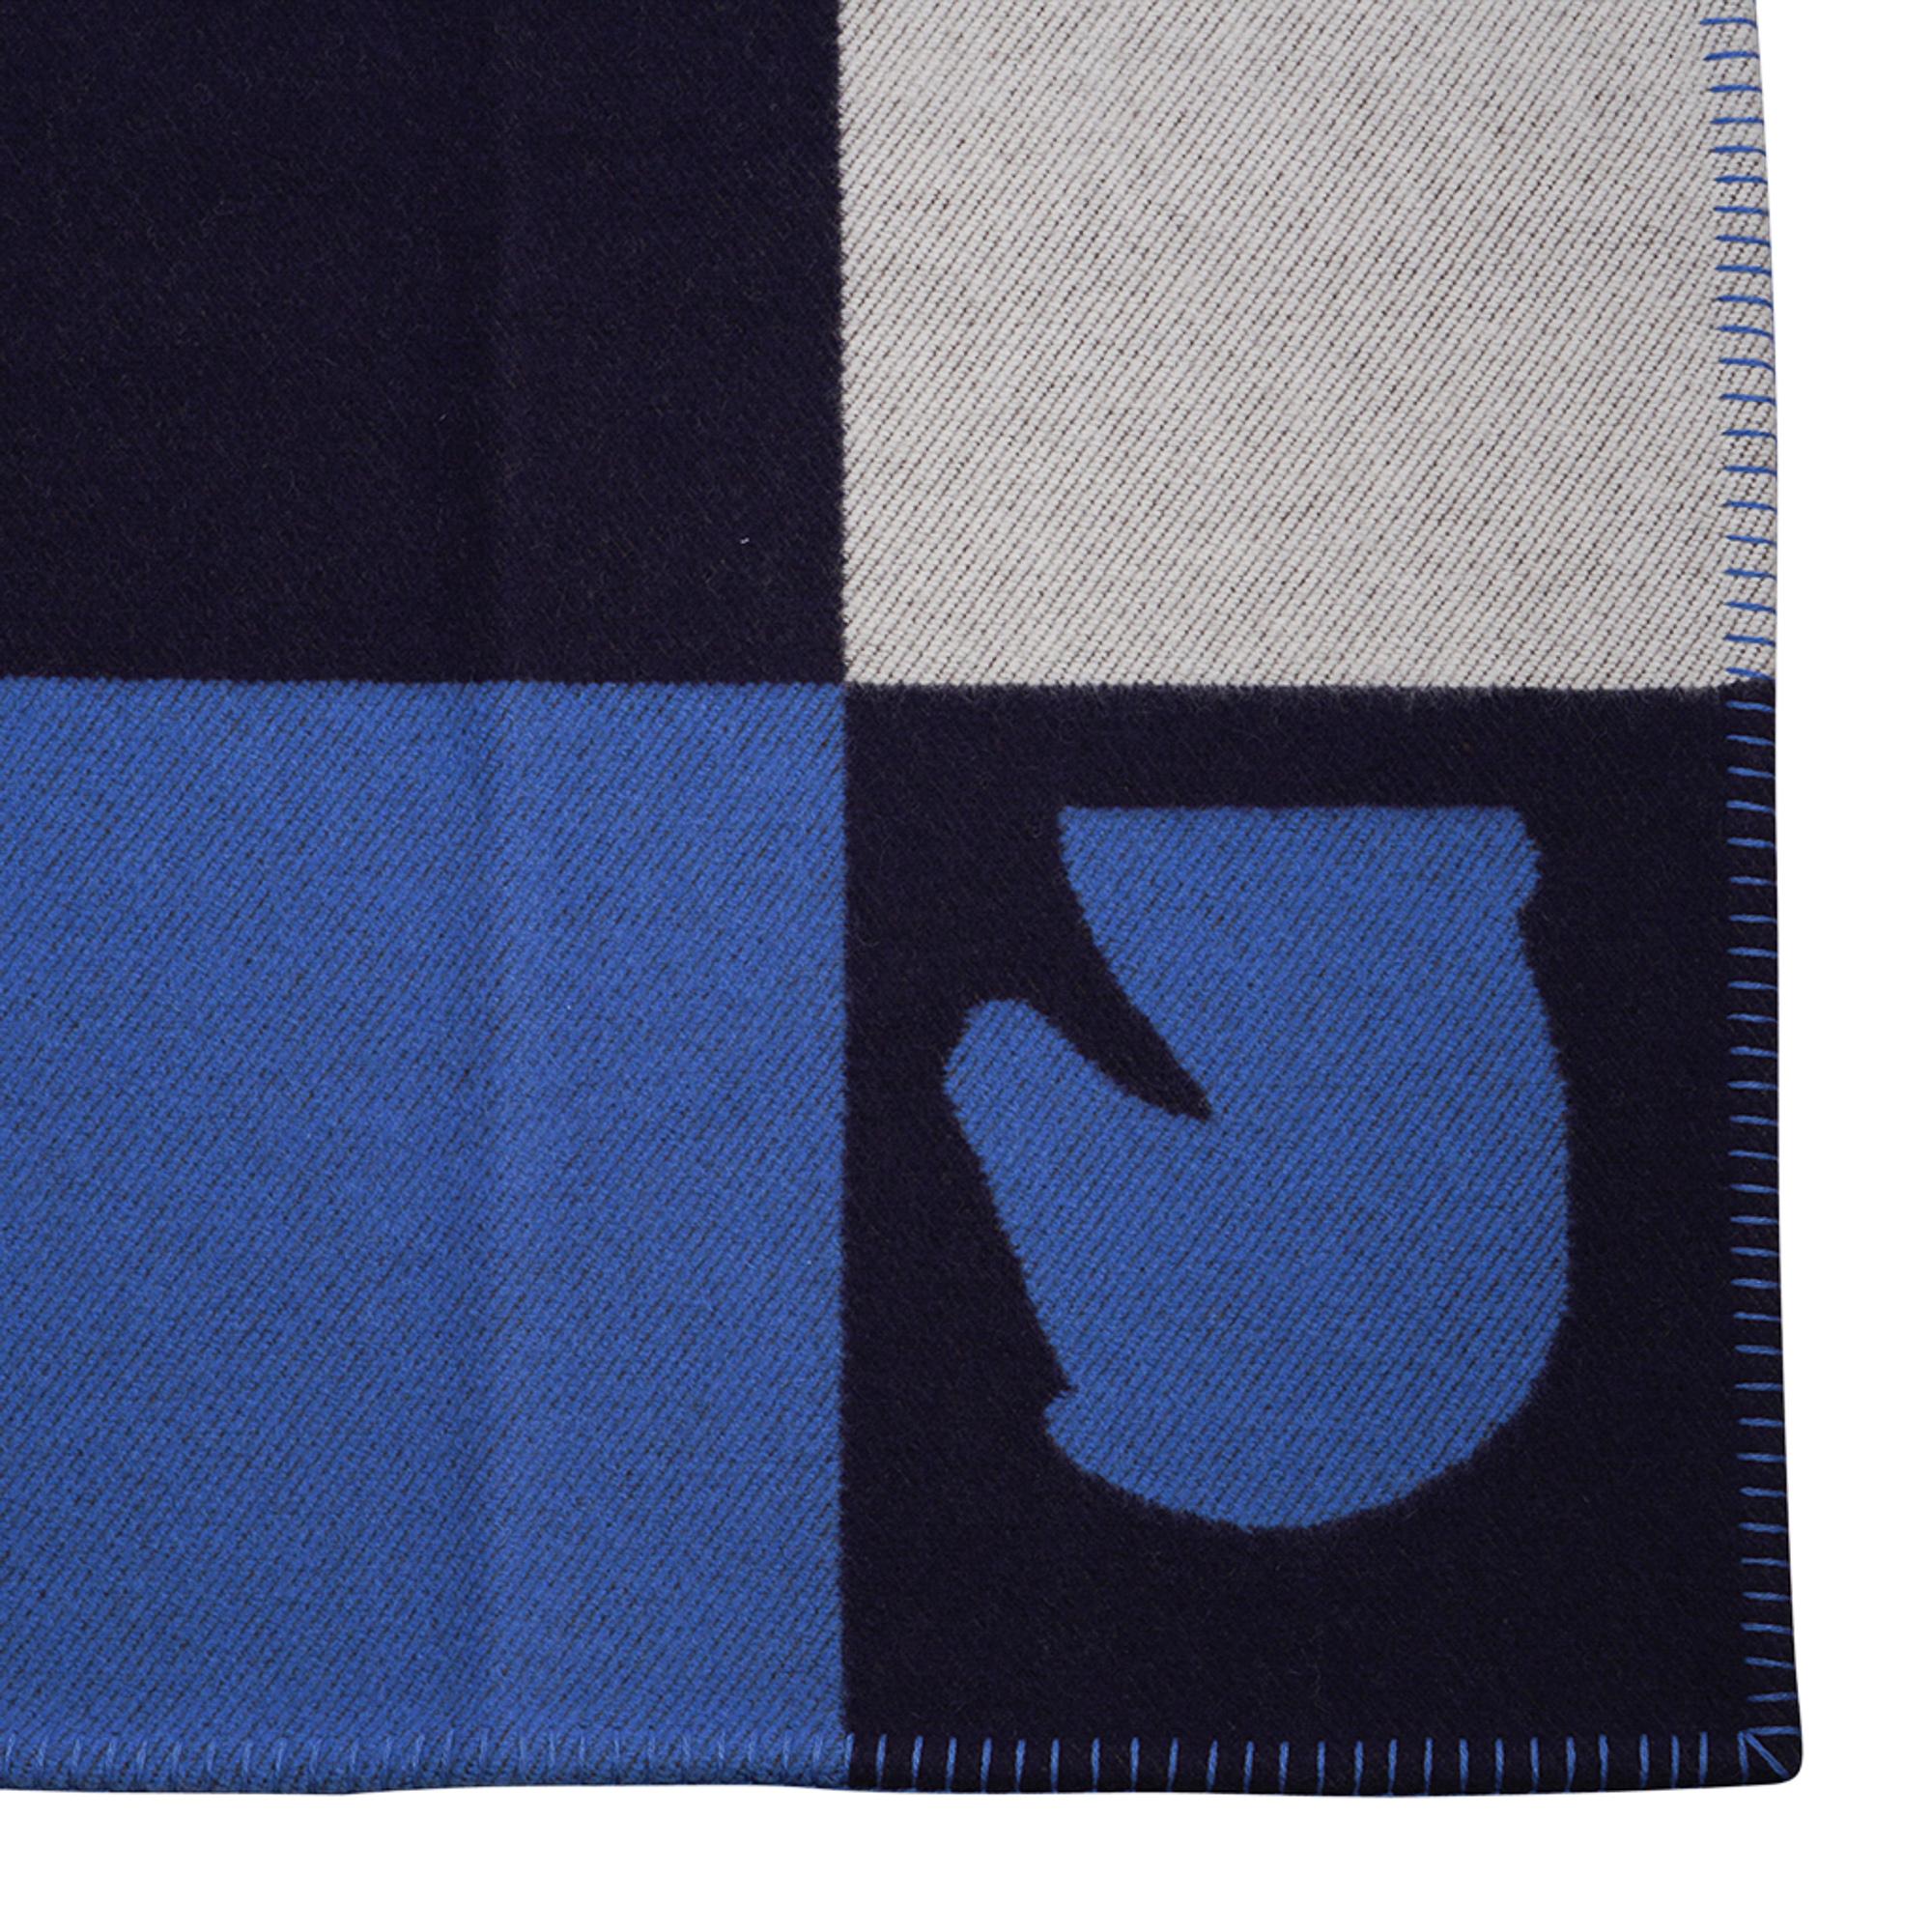 Hermes Limited Edition Samarcande Blanket Marine Wool / Cashmere  In New Condition For Sale In Miami, FL